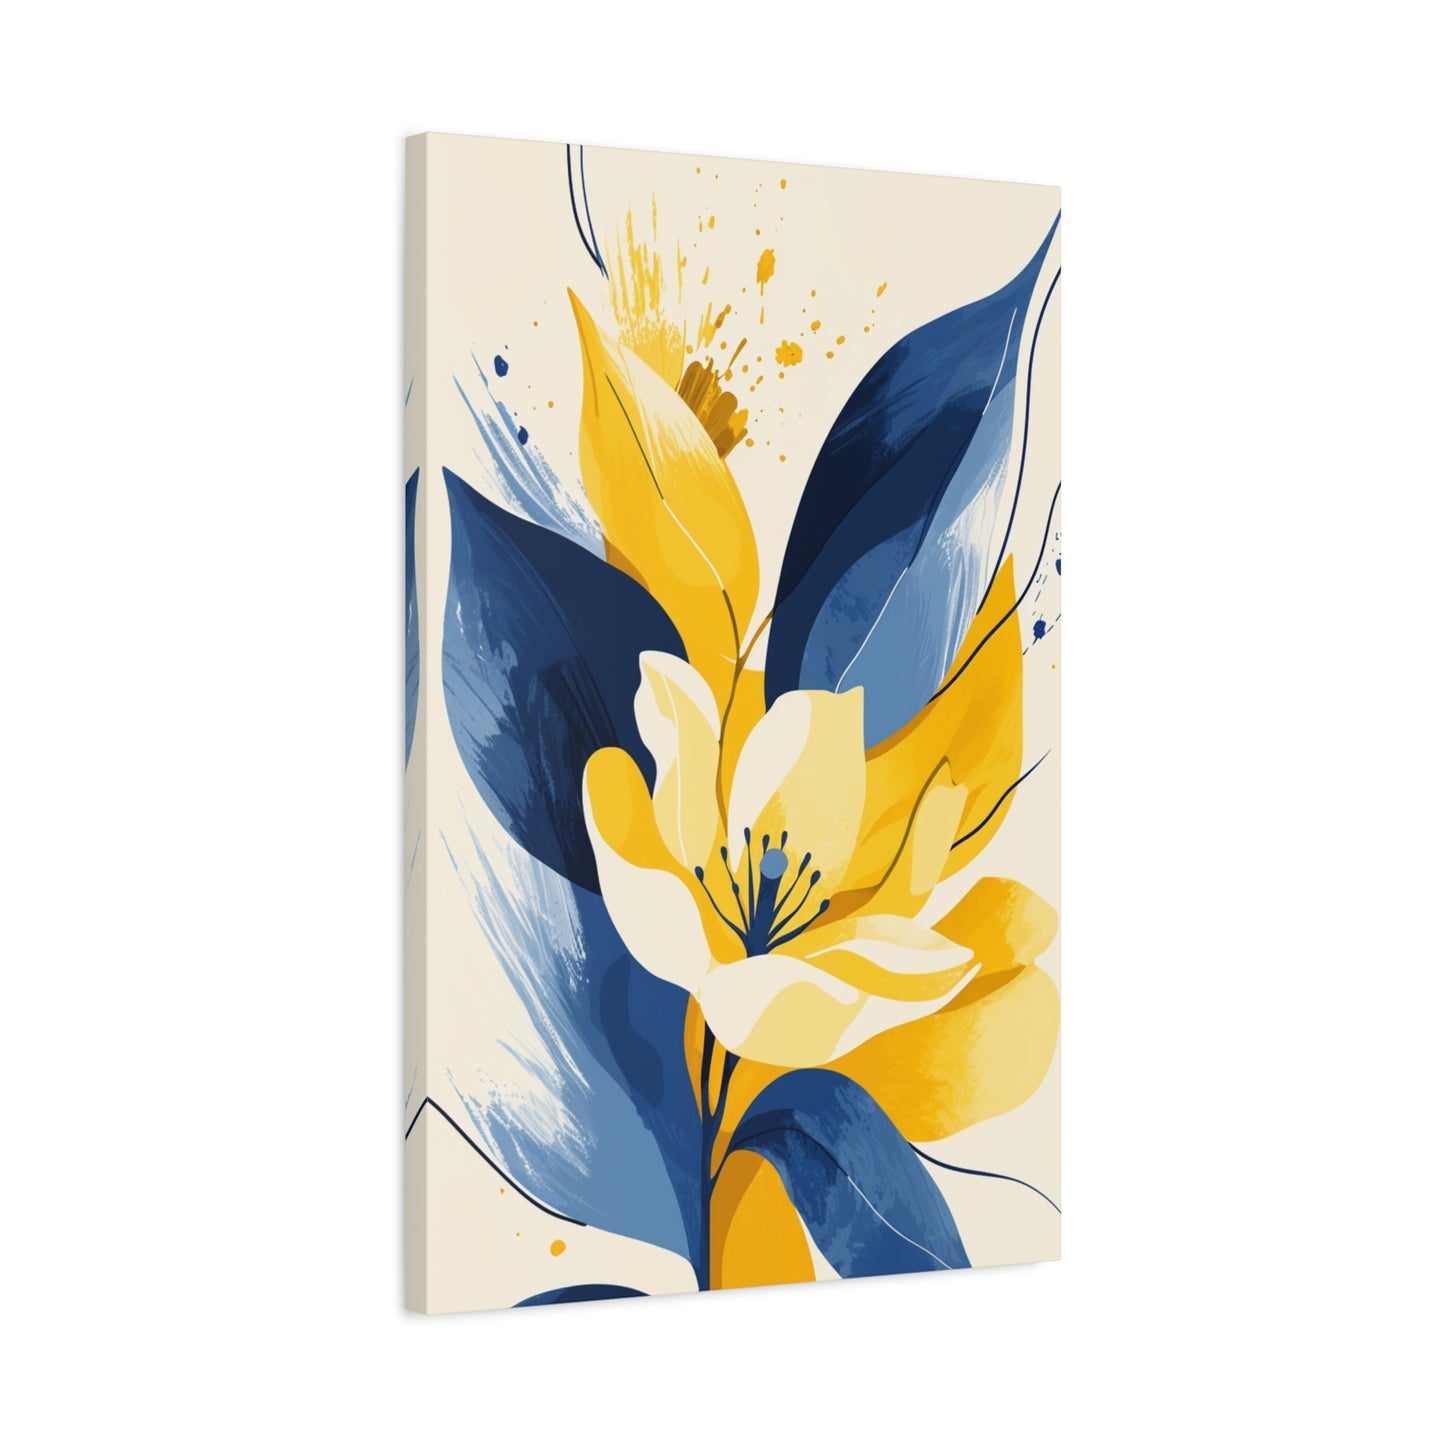 Indigo Spring (Canvas)Upgrade your tech with the latest gadgets. Shop now for innovative products designed to enhance your digital lifestyle. Fast shipping!RimaGallery